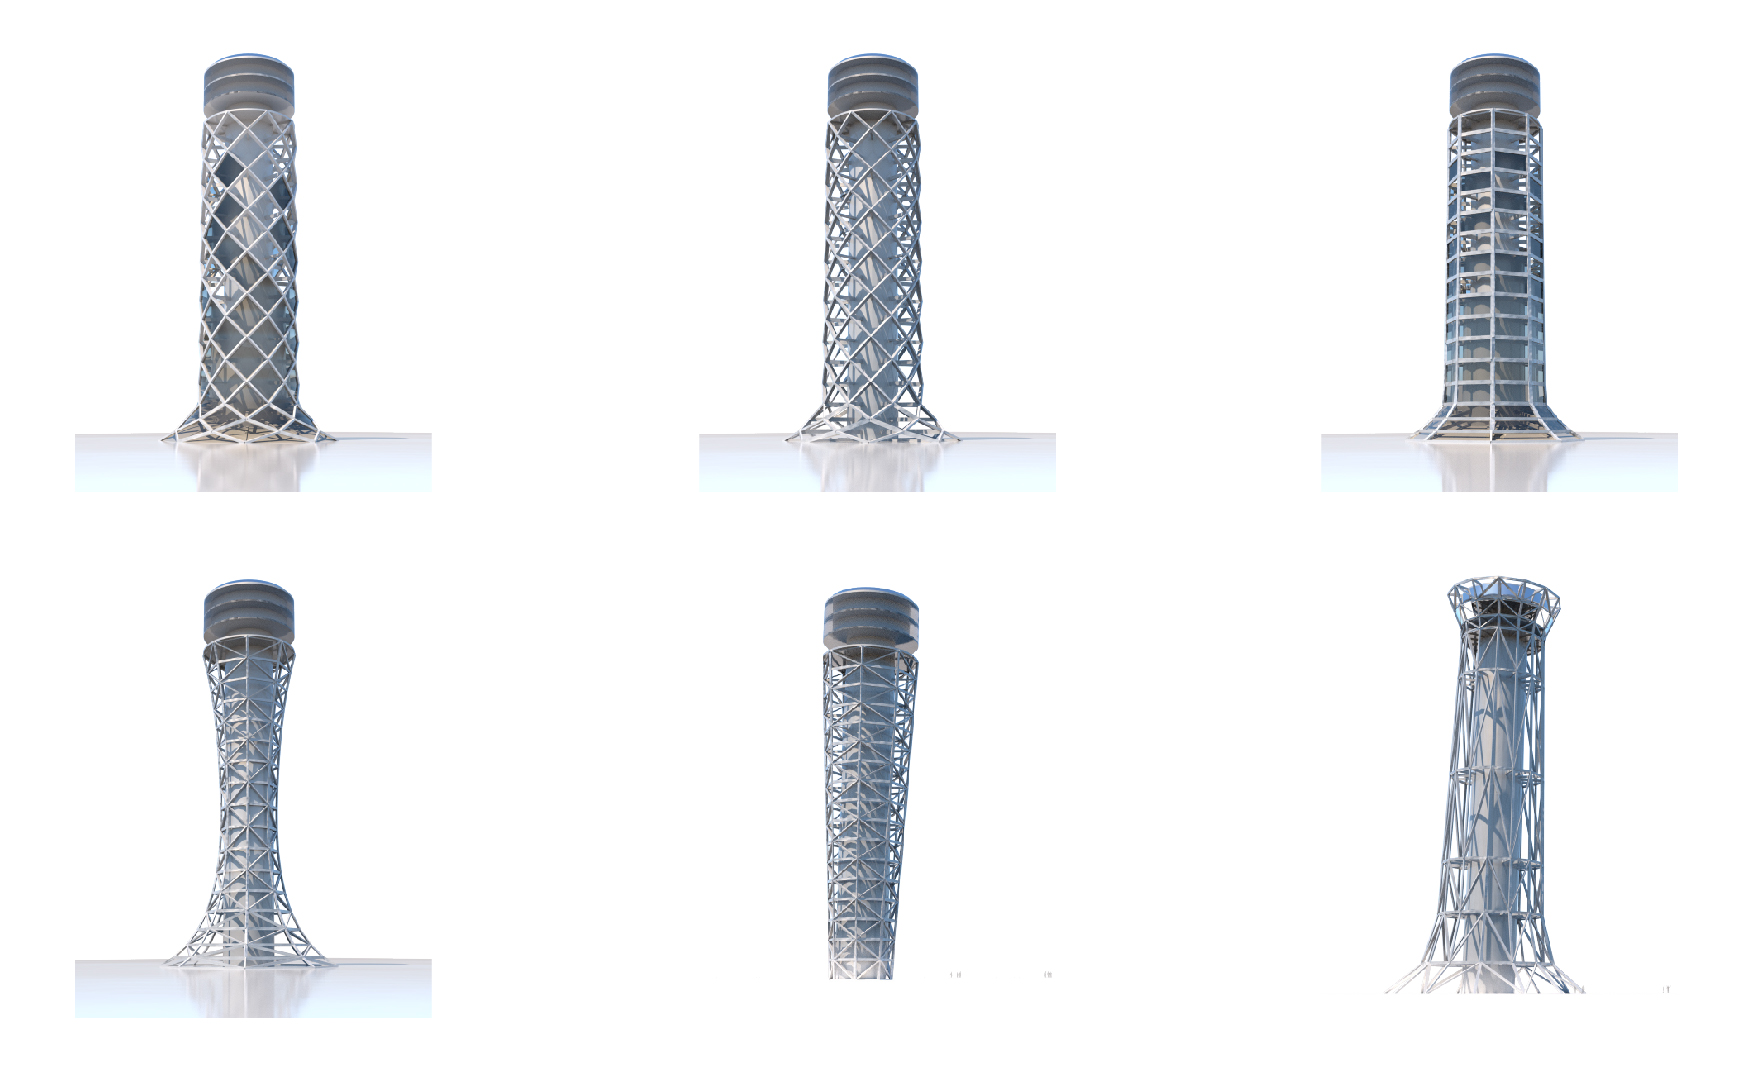 Revolving tower generated options